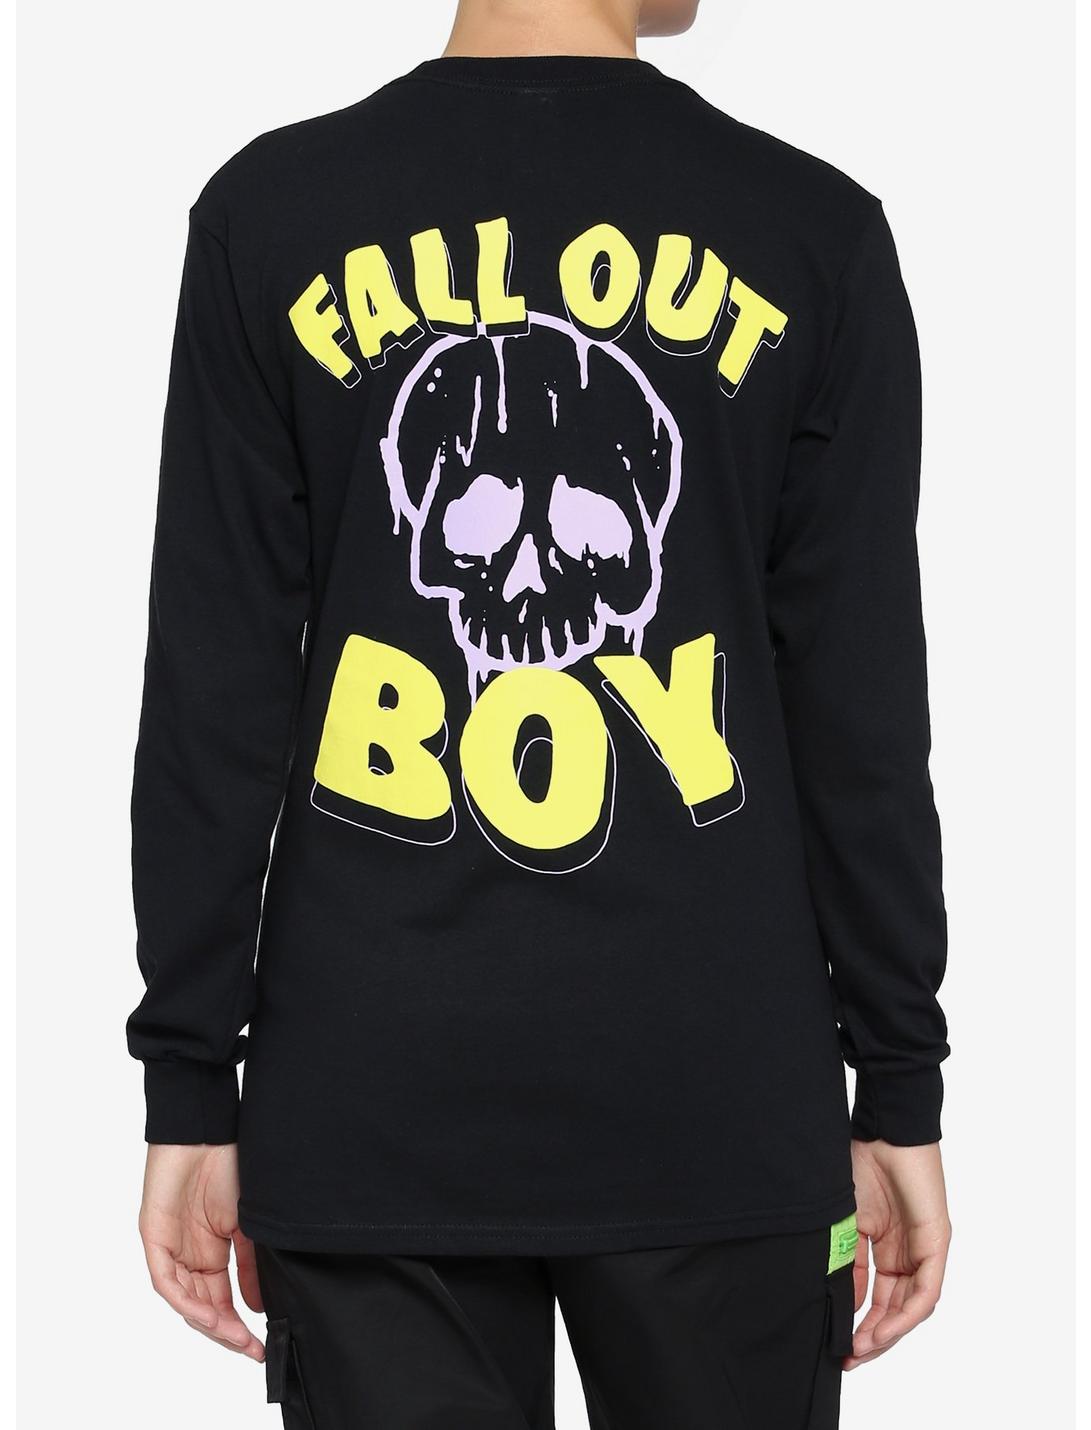 Fall Out Boys Chicago Illinois Girls Long-Sleeve T-Shirt, BLACK, hi-res